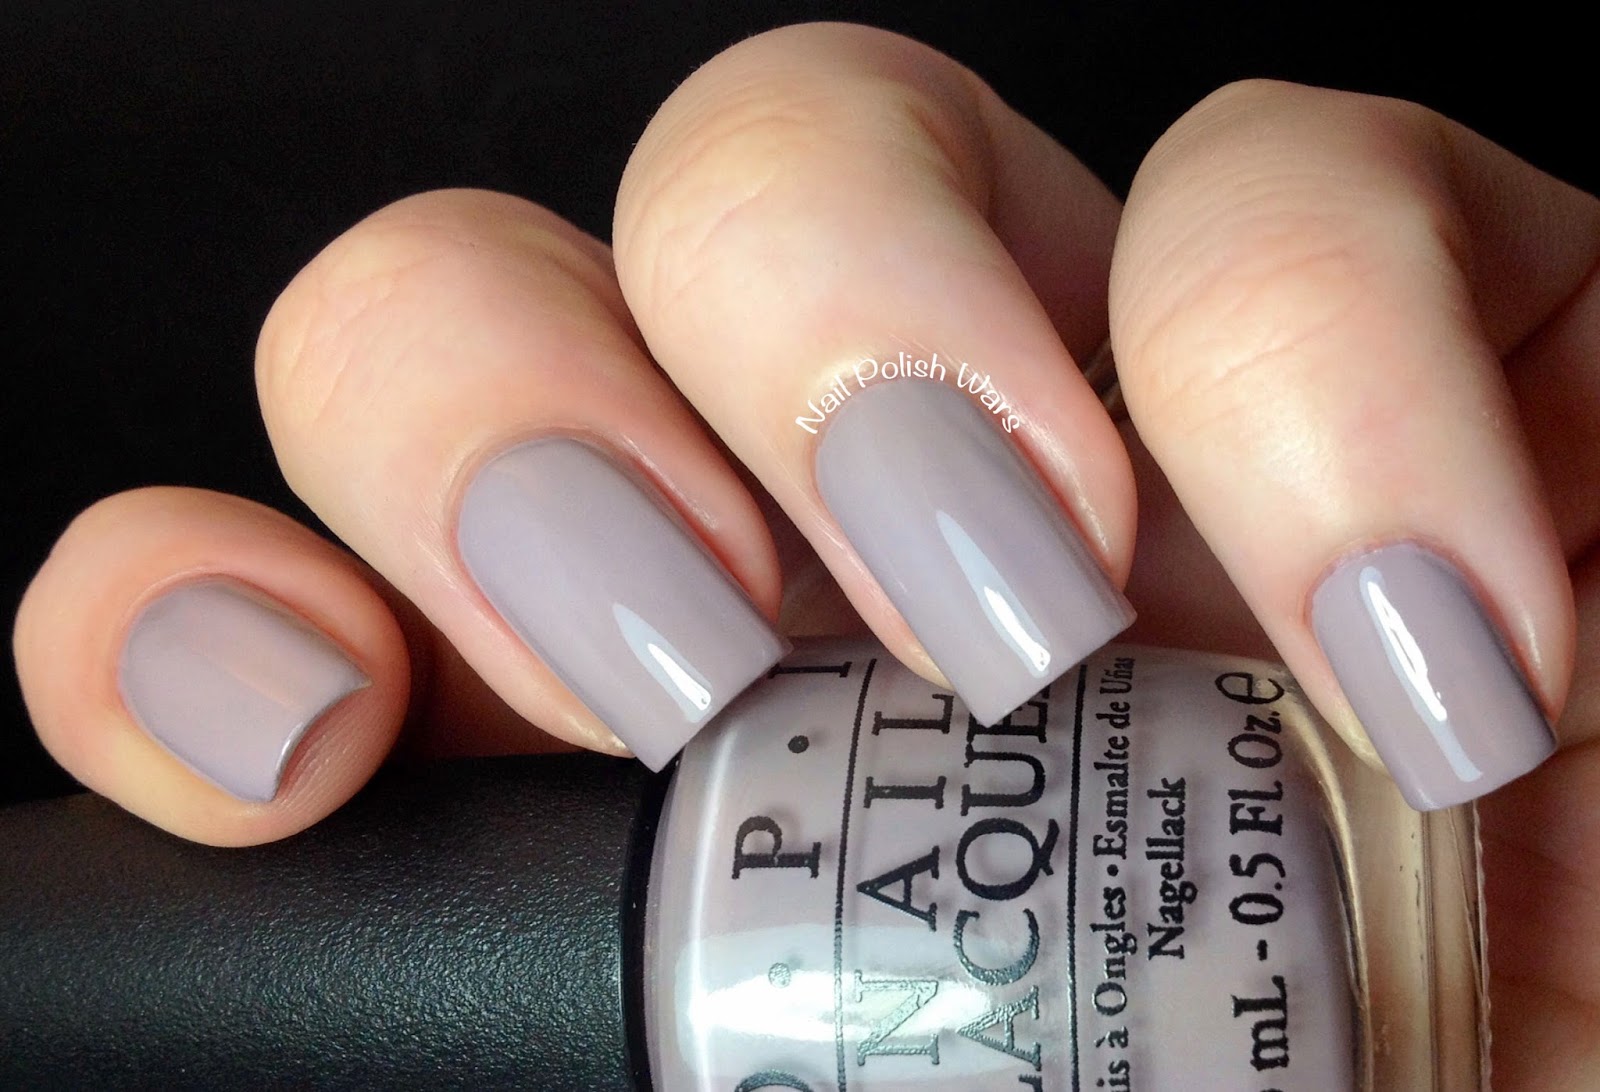 OPI Nail Lacquer in "Taupe-less Beach" - wide 3